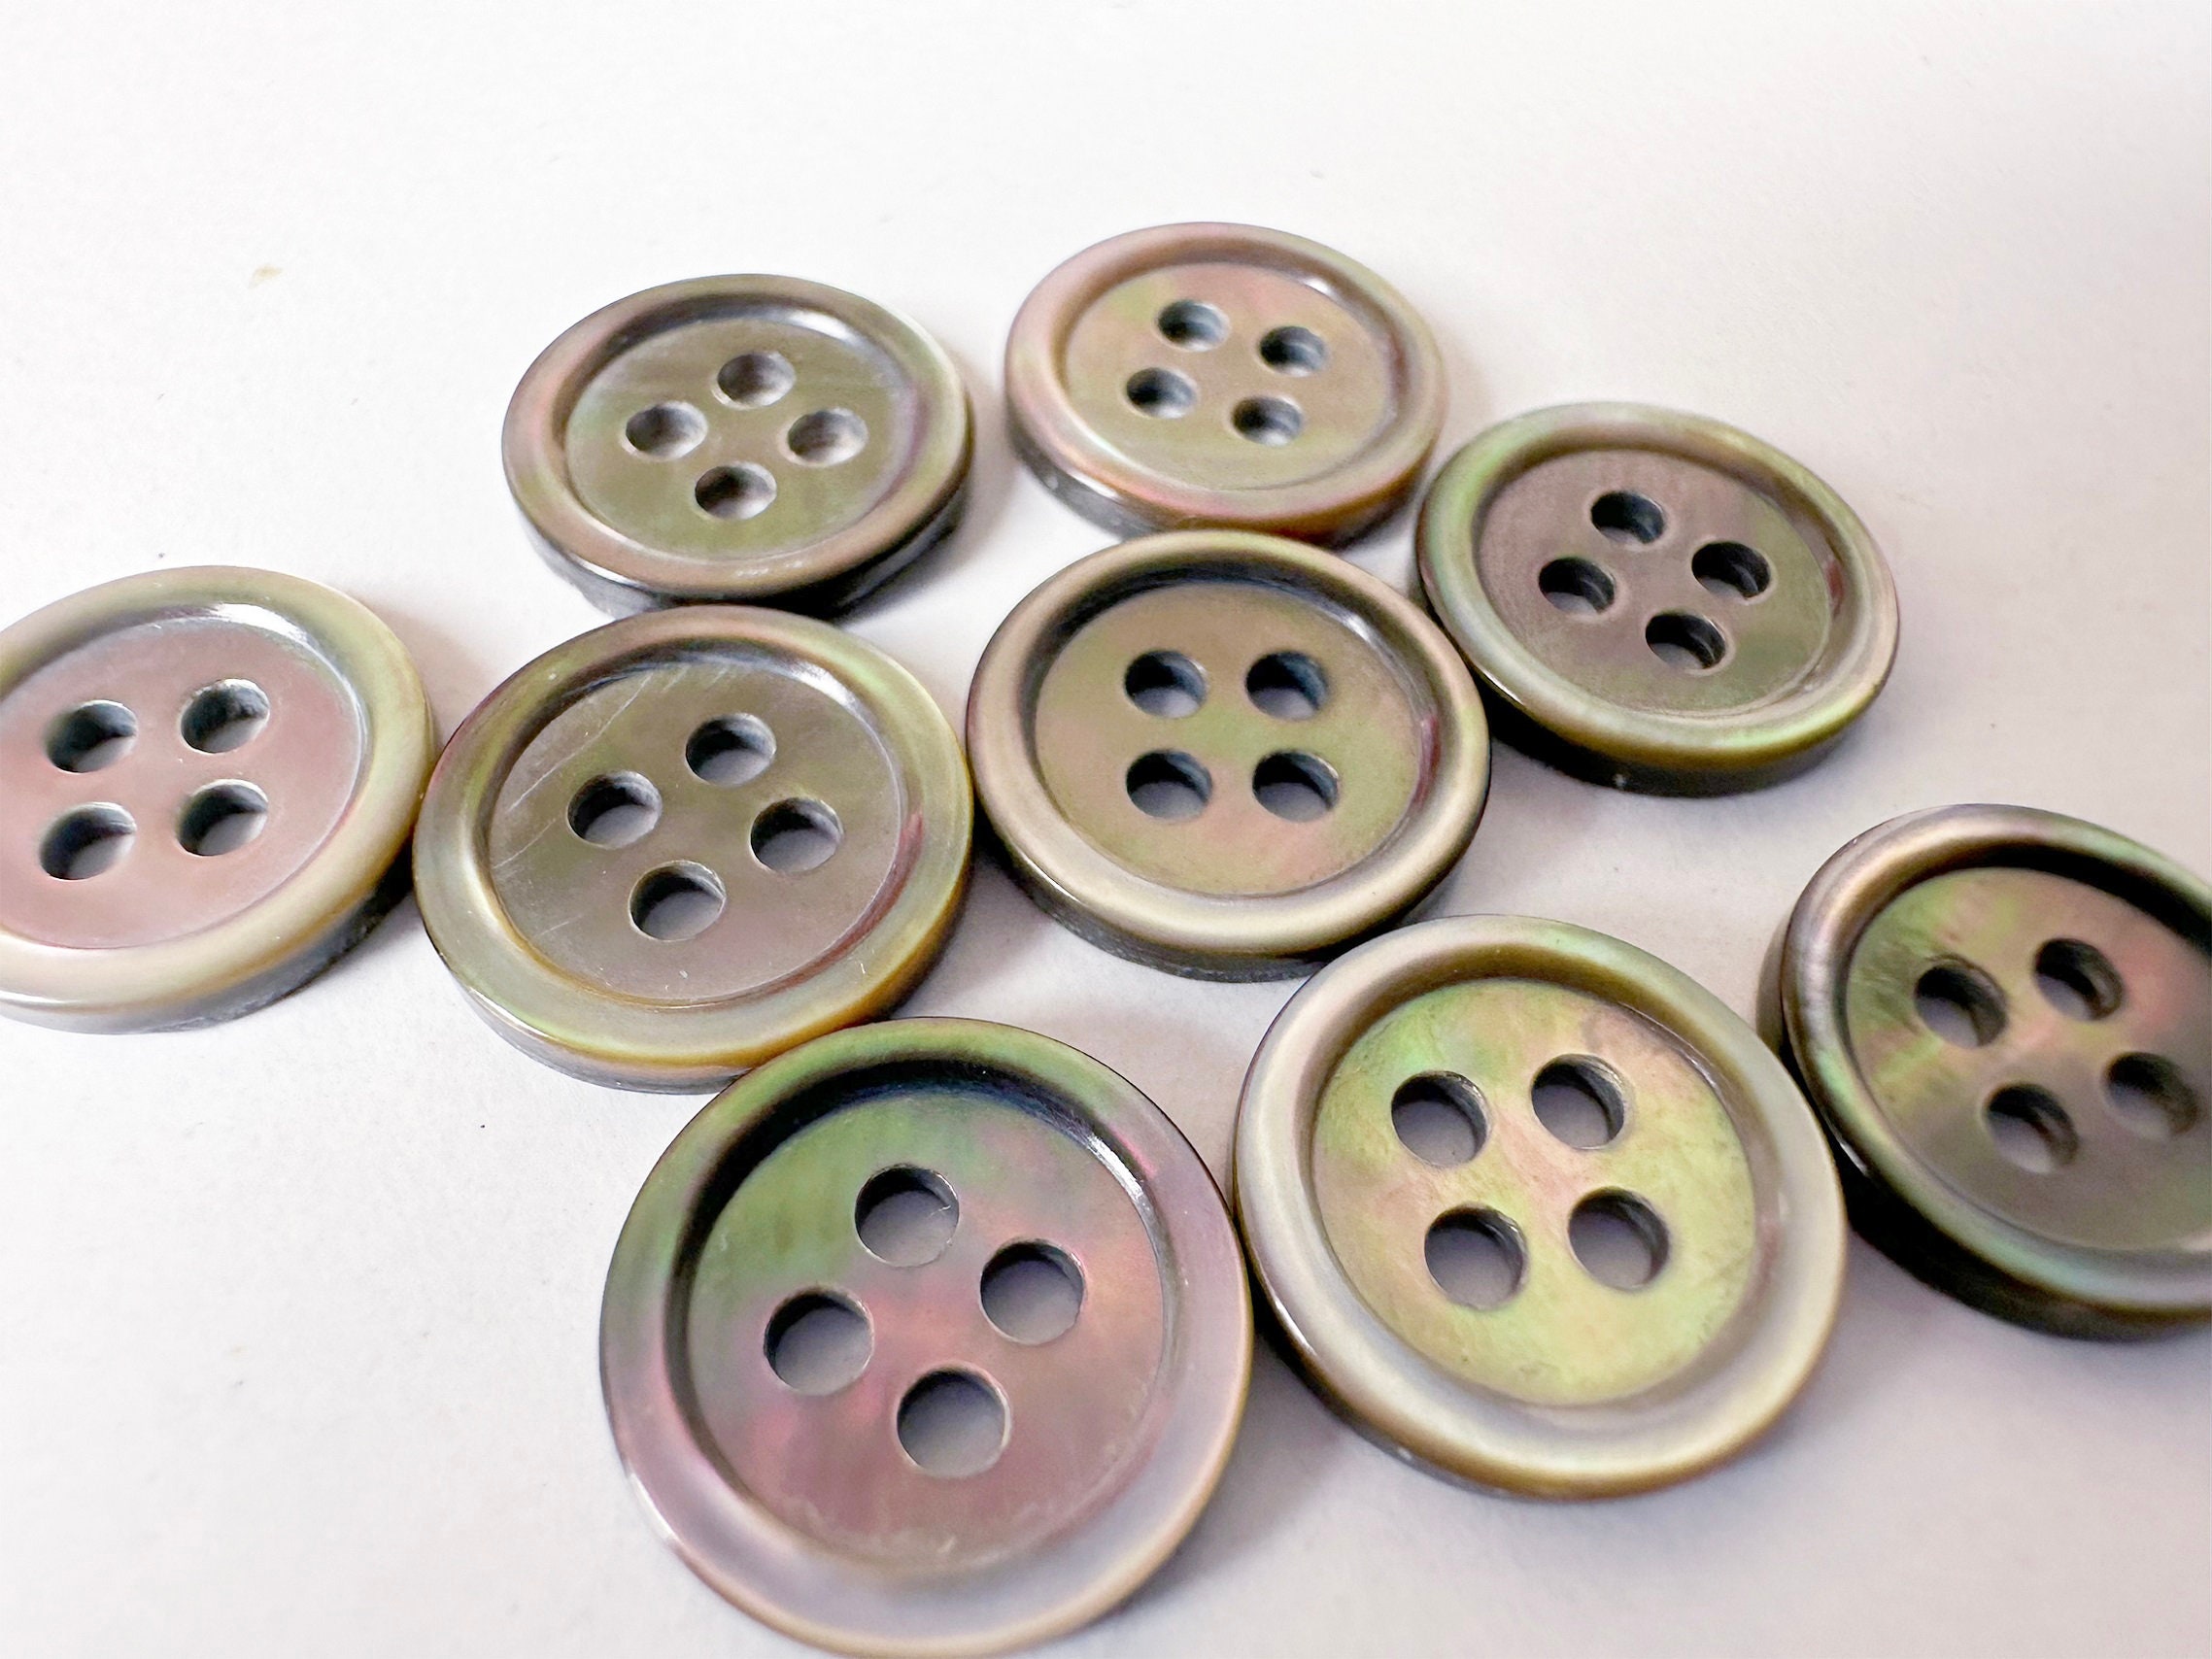 Wooden Buttons, 12-20 mm, 2-4 Holes, Assorted Colours, 360 pc